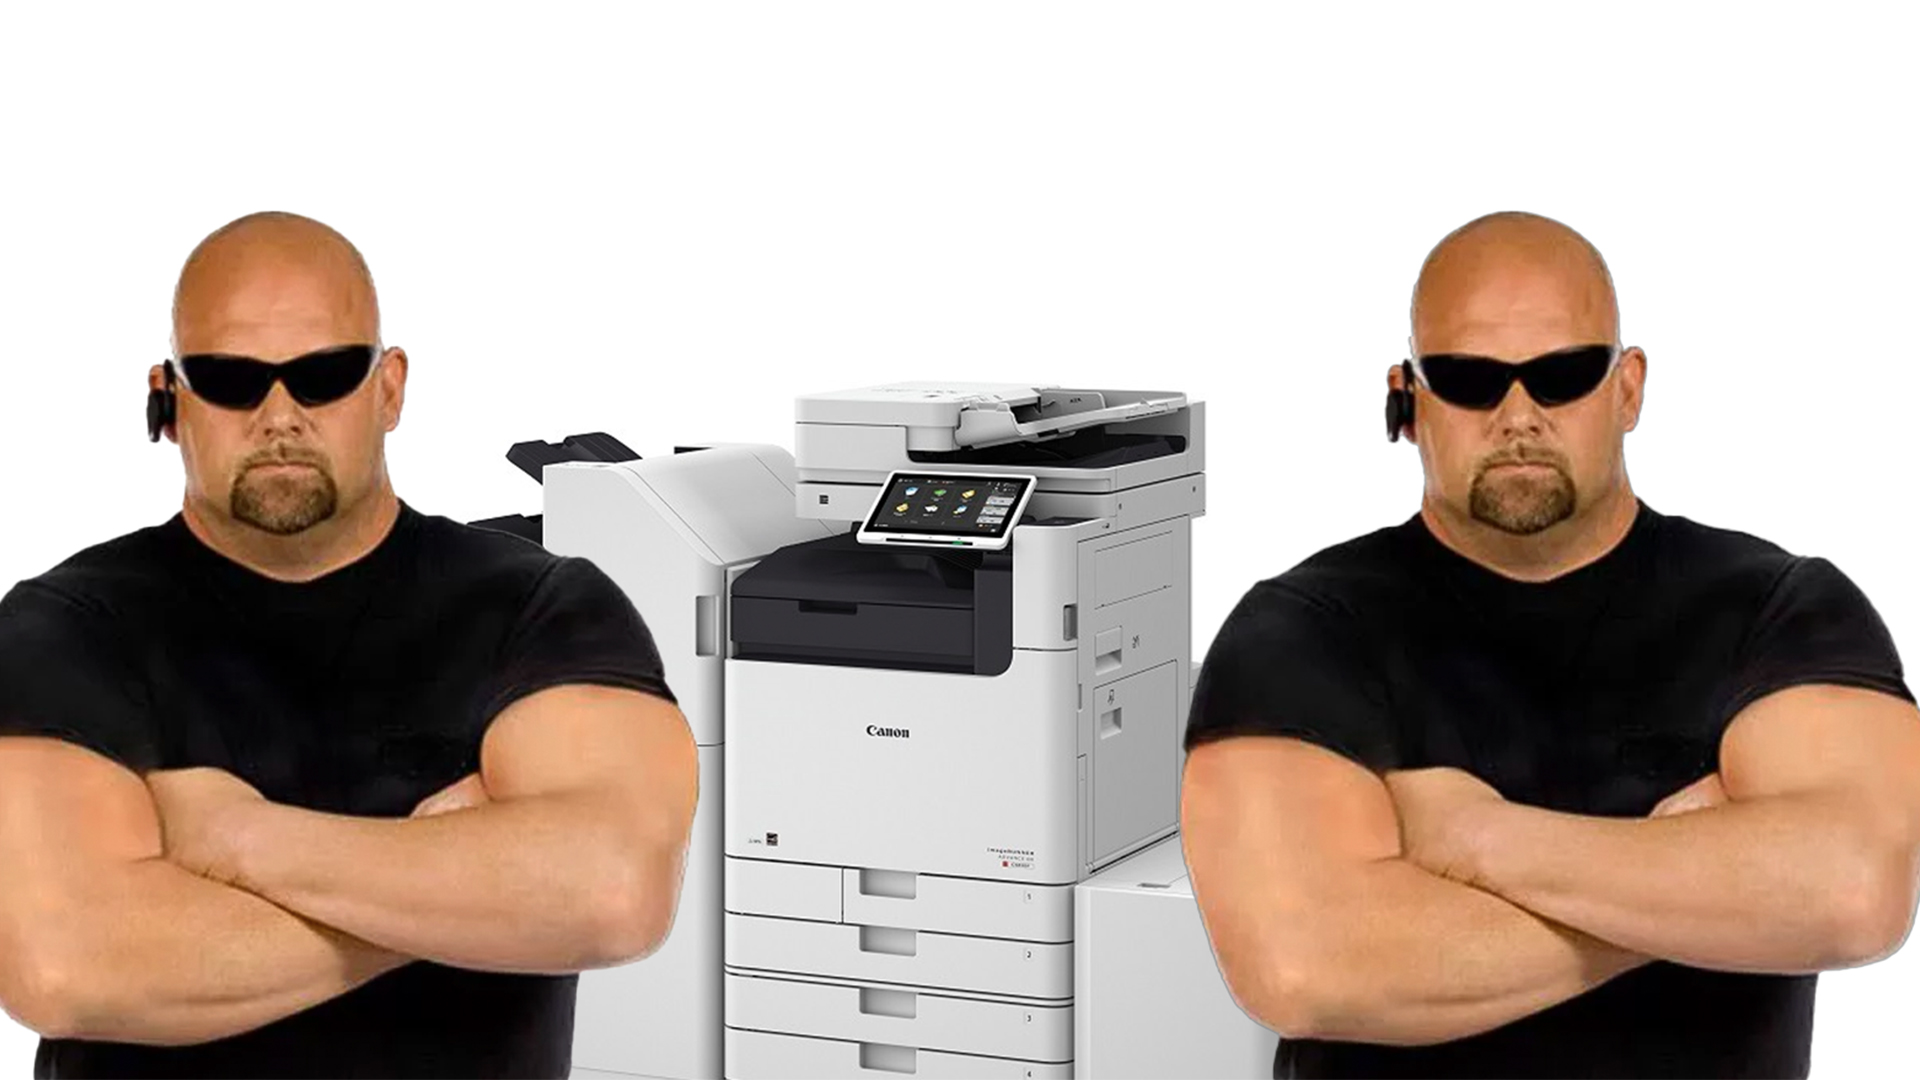 Protect Your Printer: Our Top Security Tips